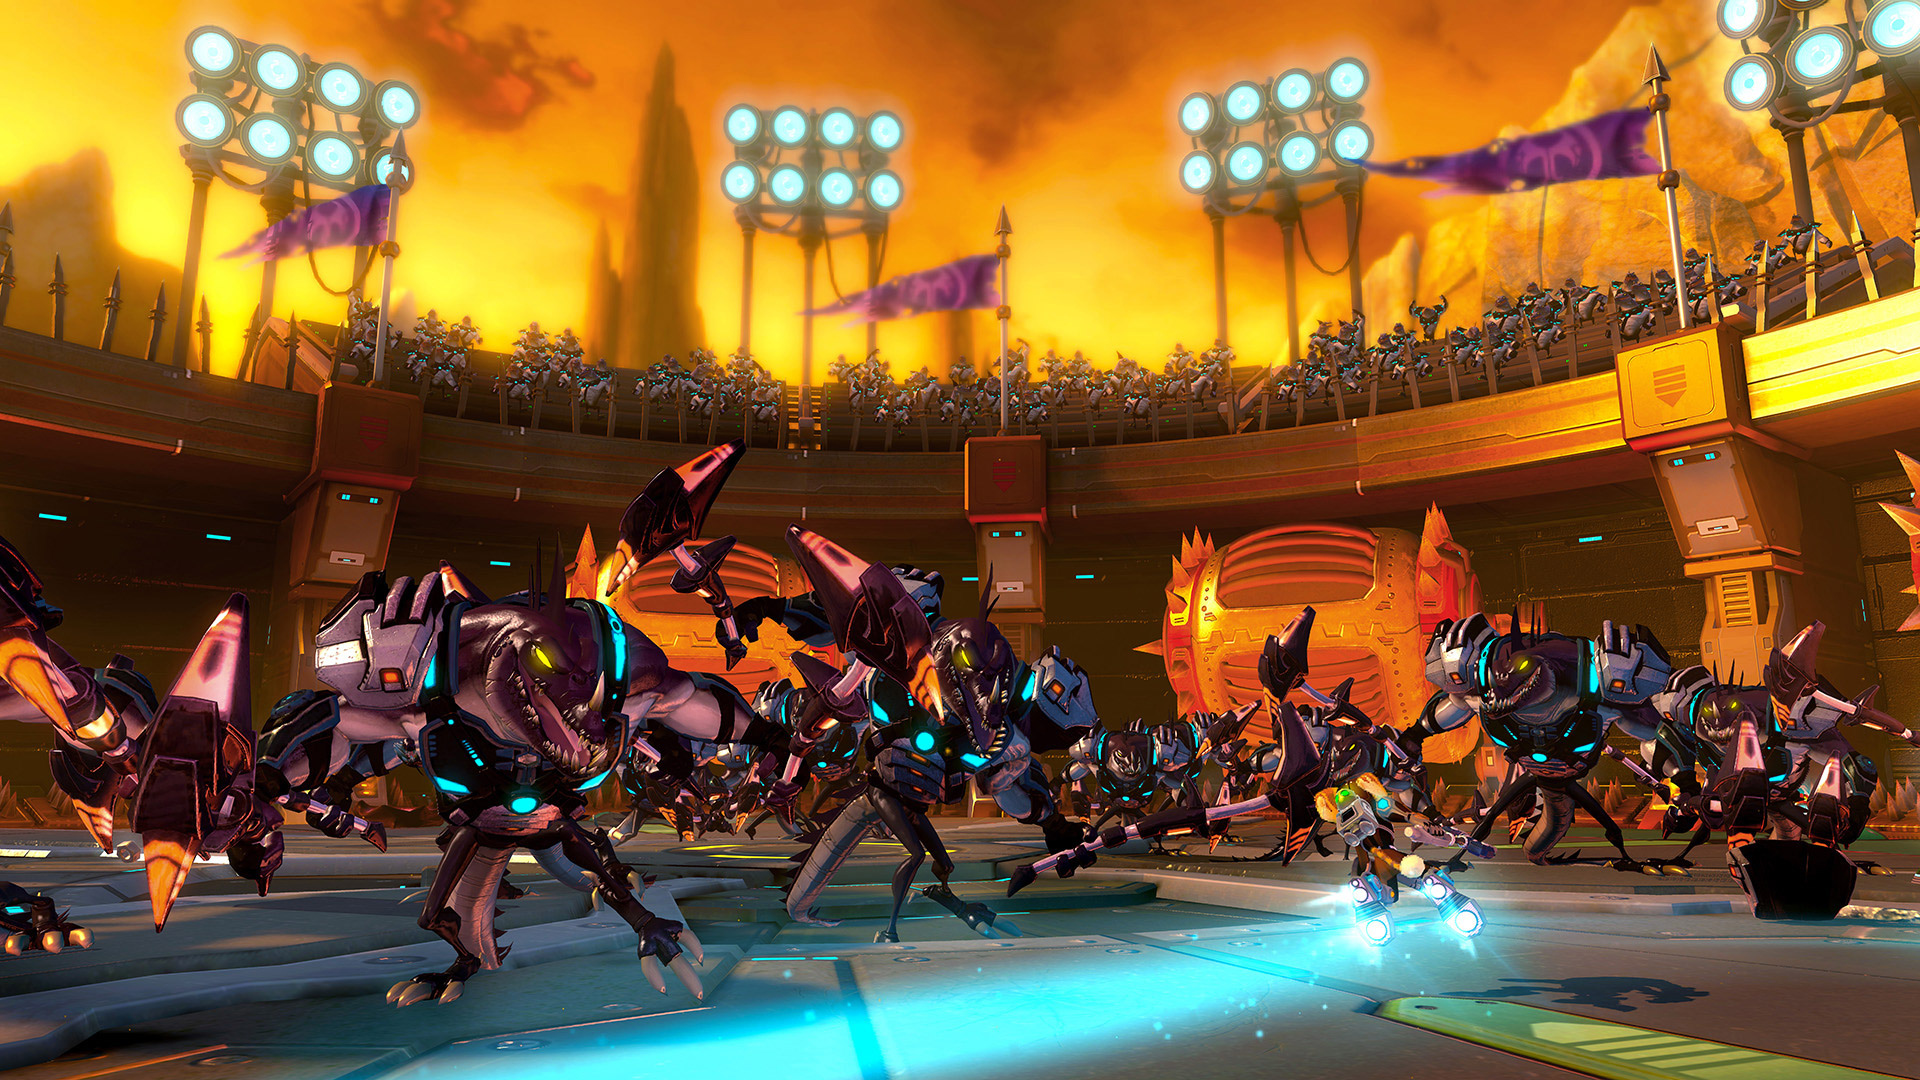 free download ratchet and clank into the nexus full game